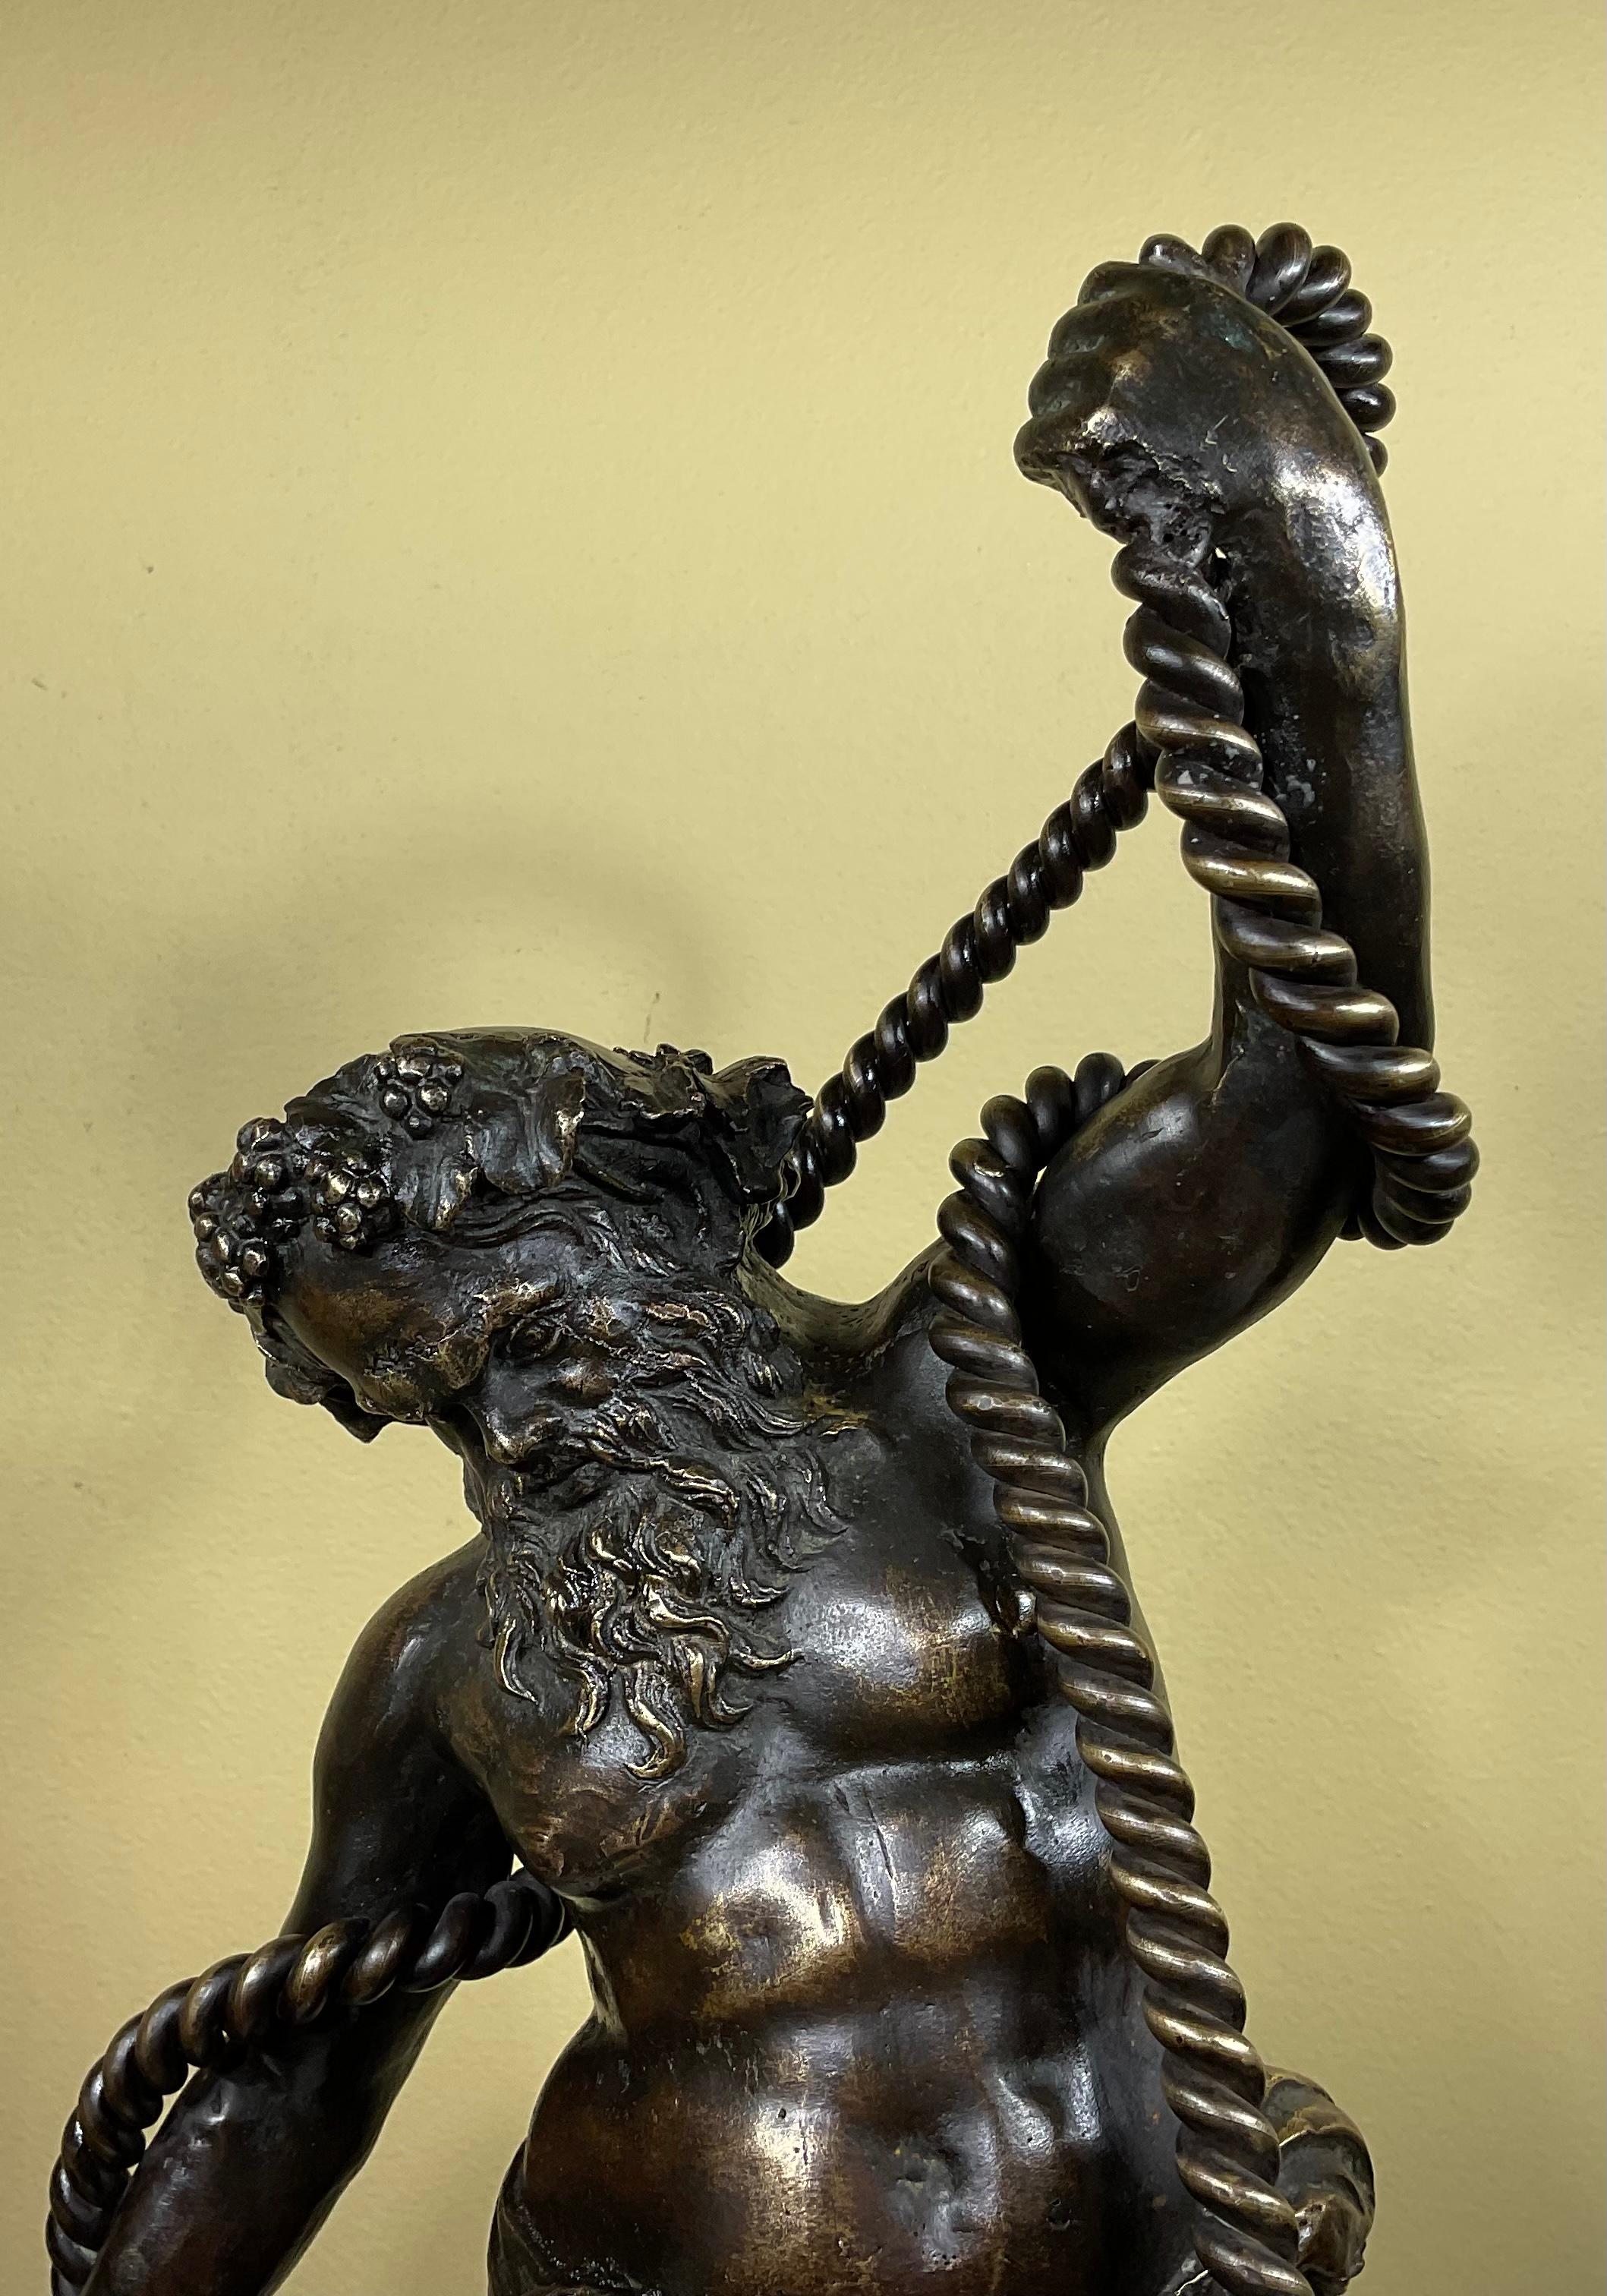 Bronze sculpture of Samson trying to free himself form the chain, in the ultimate act in the biblical story of Samson and Delilah.
Great facial expression, and vivid details.
Exceptional object of art for display.
Unsigned.
 